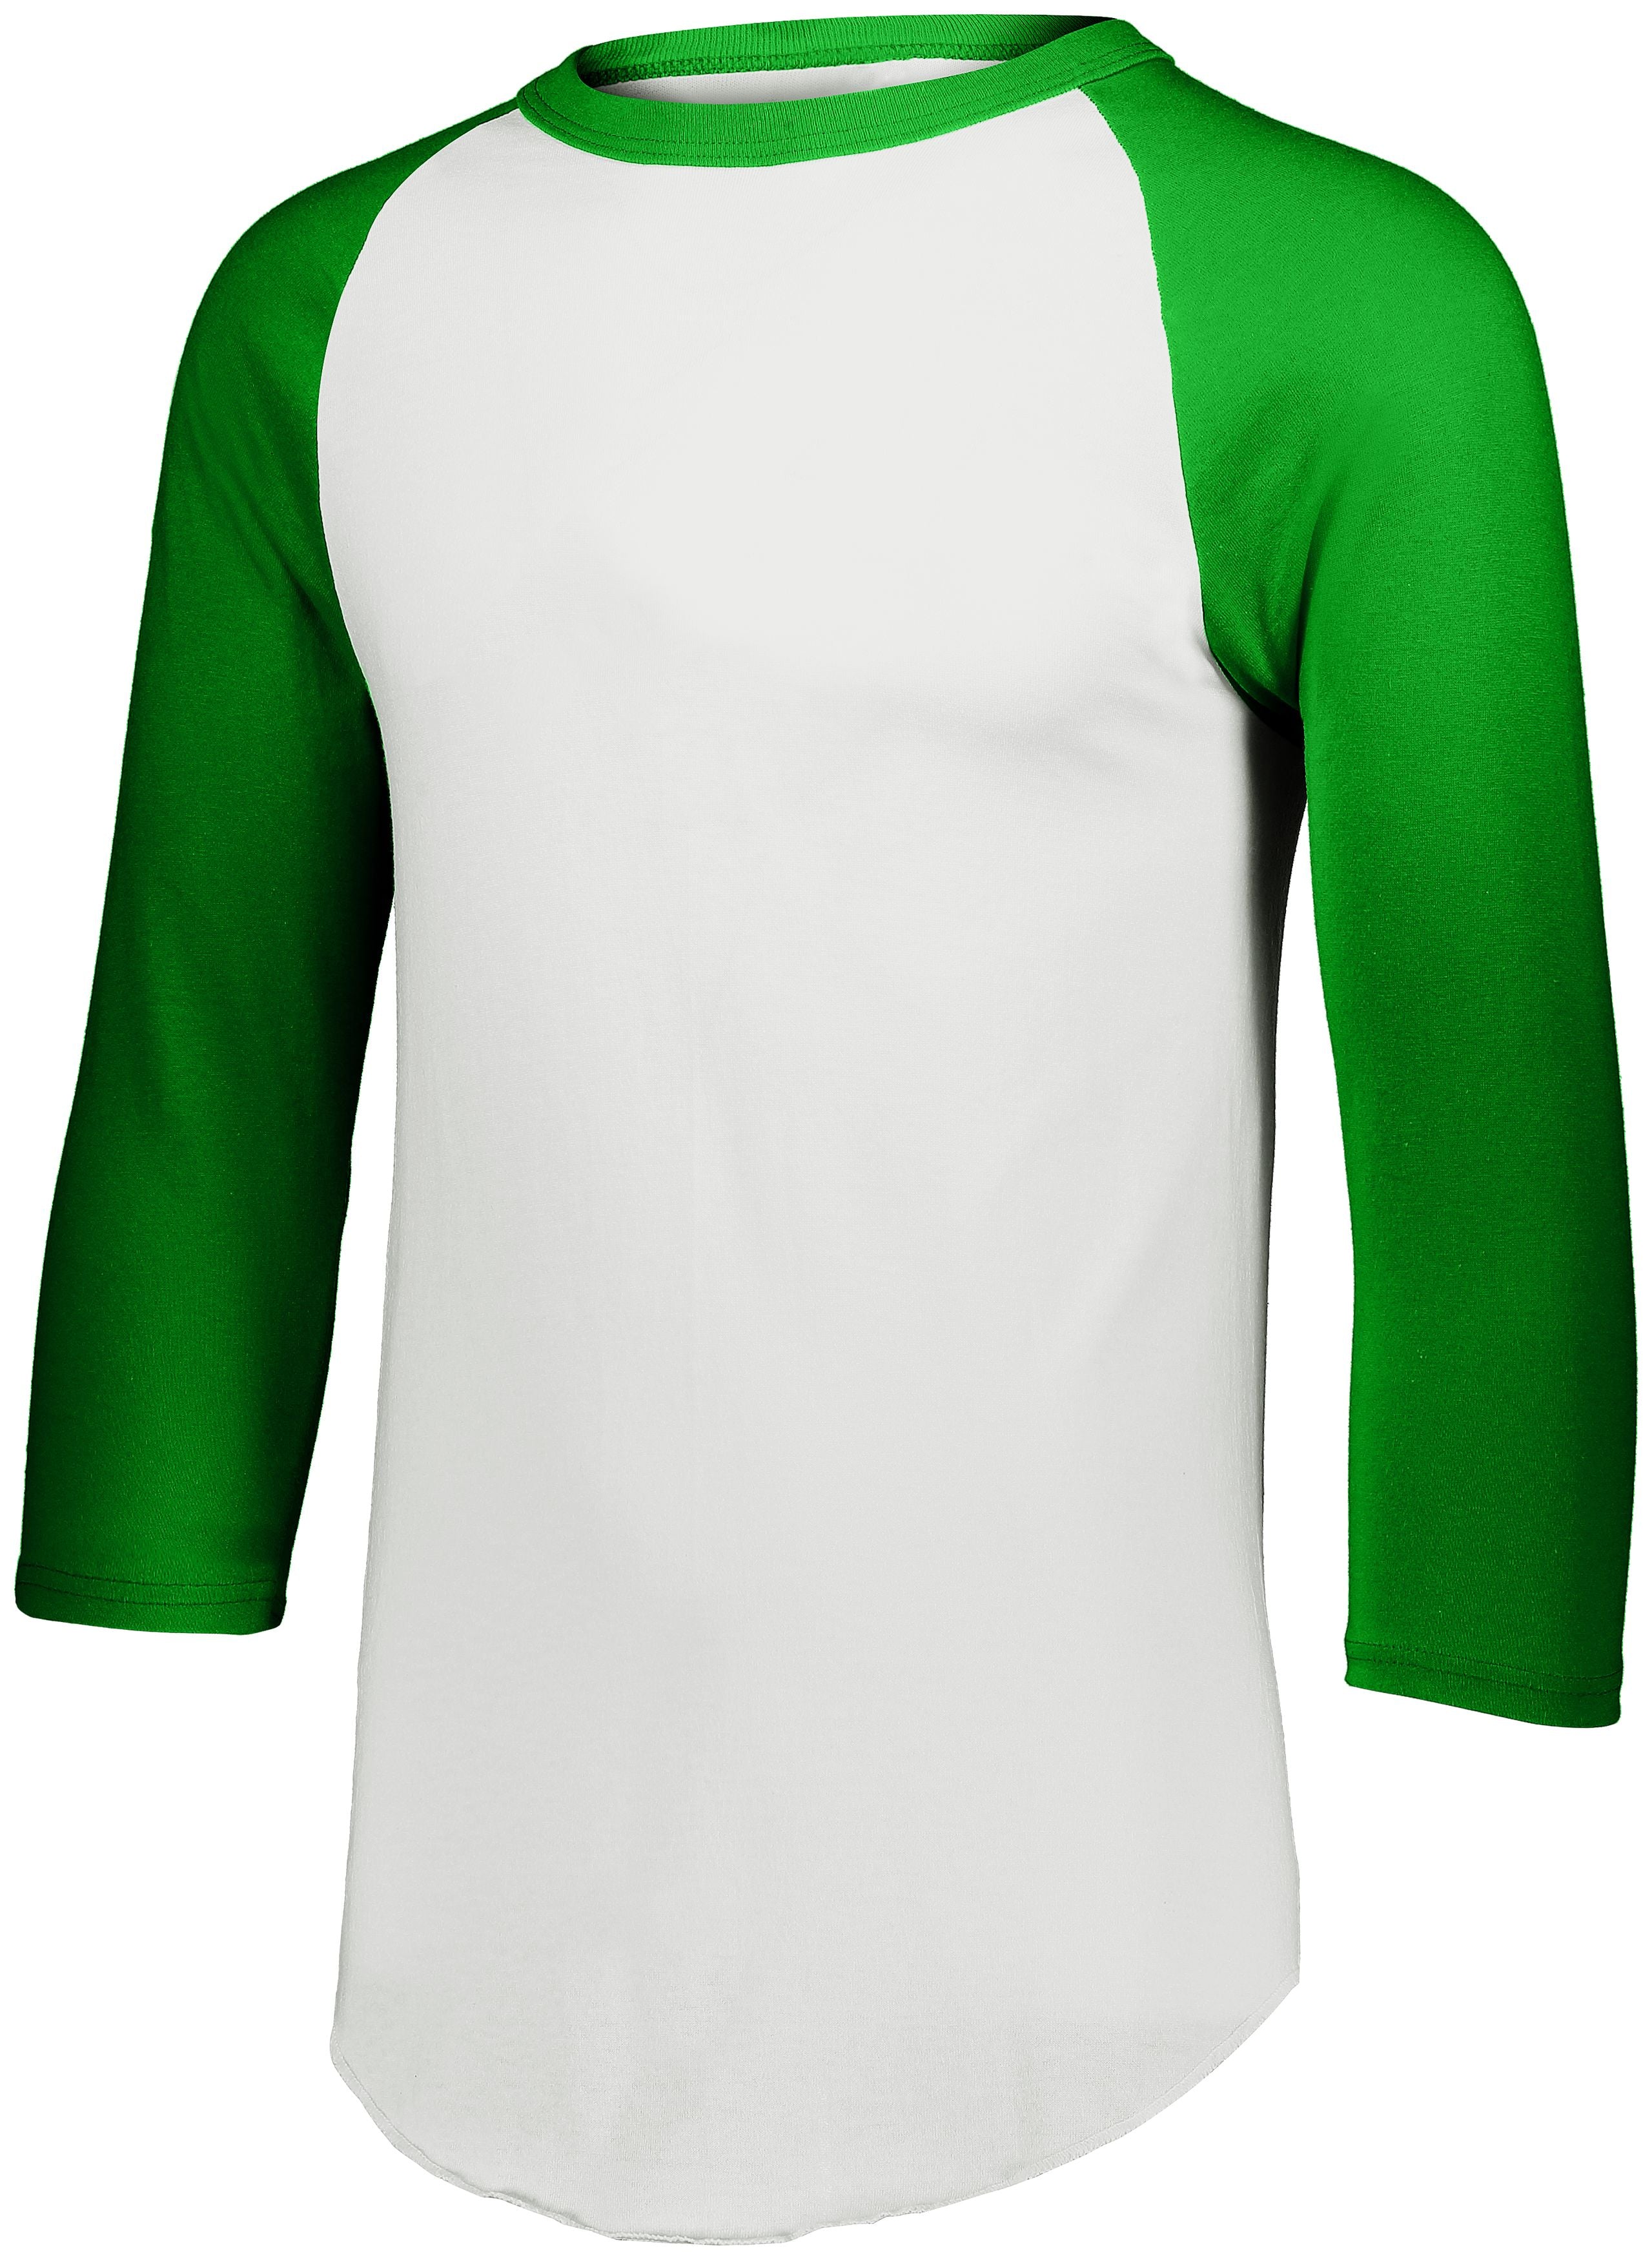 Augusta Sportswear Youth Baseball Jersey 2.0 in White/Kelly  -Part of the Youth, Youth-Jersey, Augusta-Products, Baseball, Shirts, All-Sports, All-Sports-1 product lines at KanaleyCreations.com